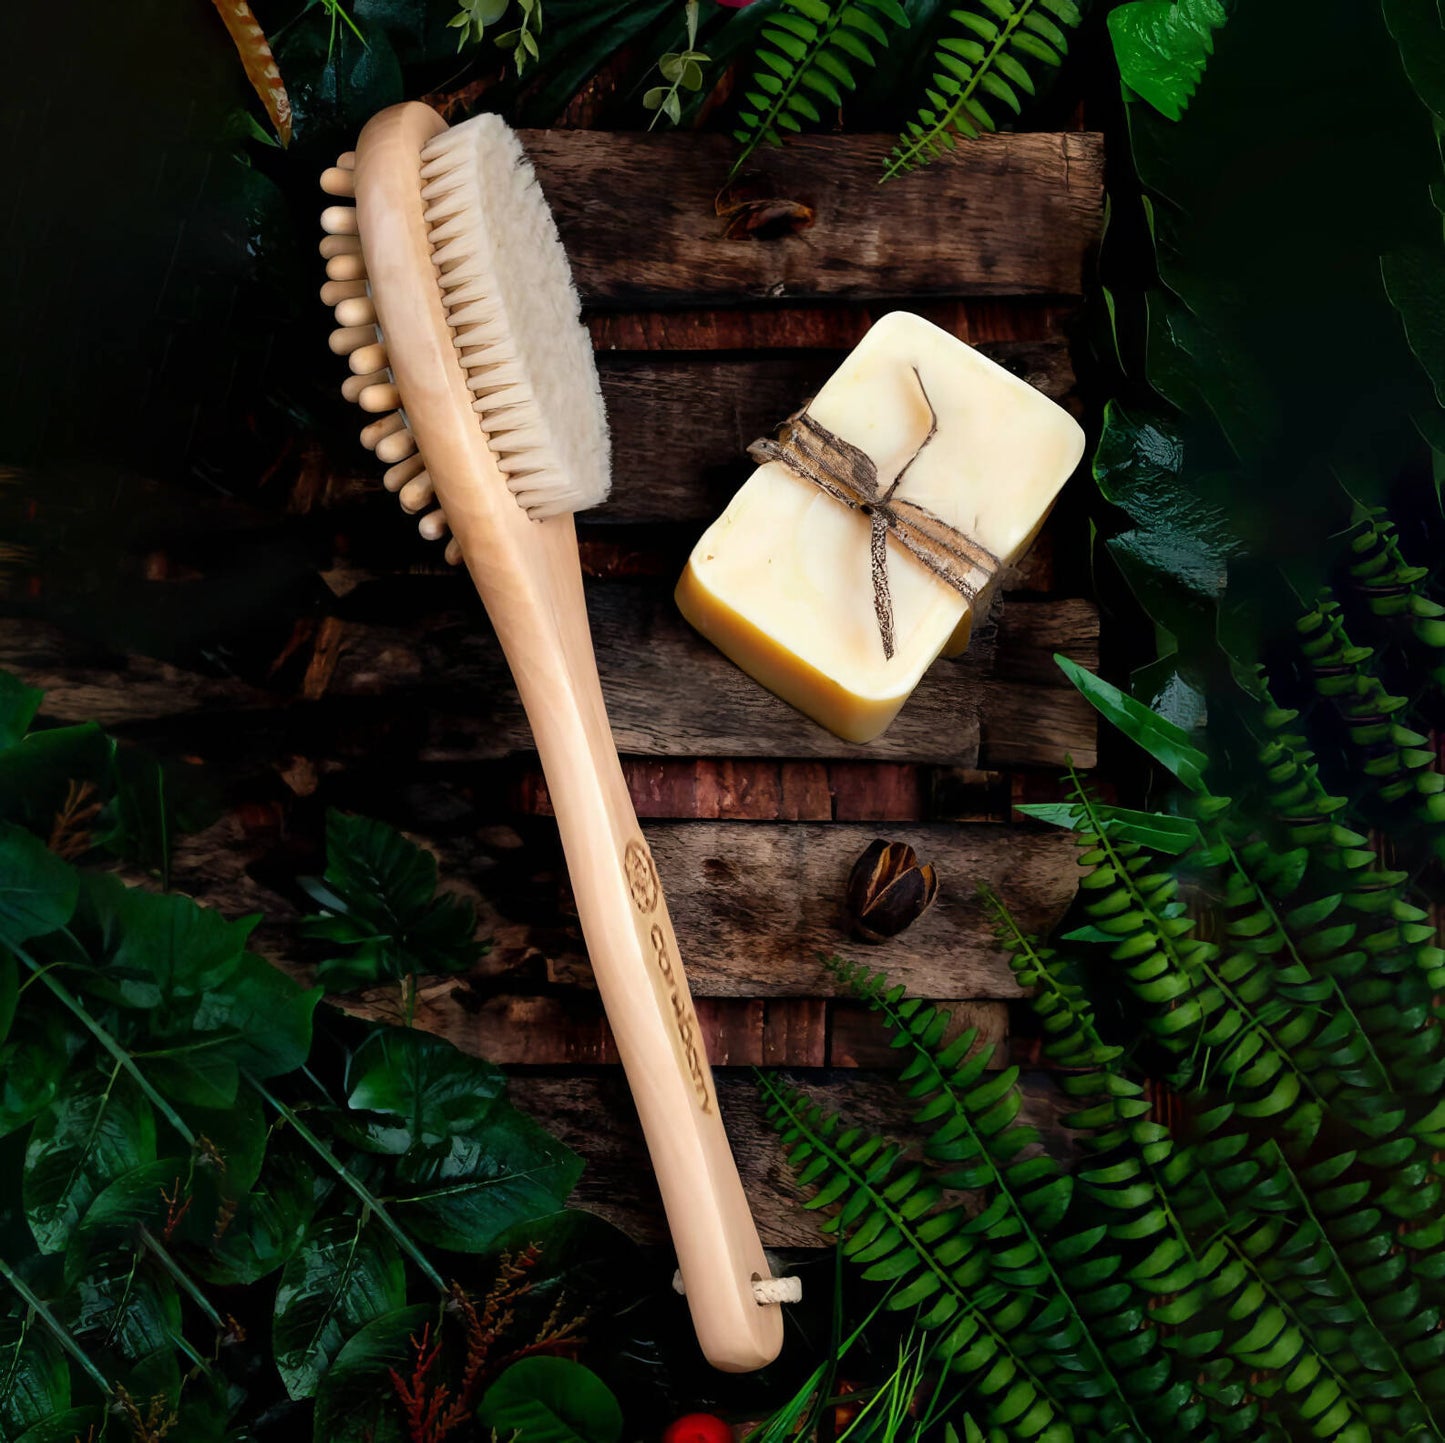 Careberry Dual-Action Bamboo Body Brush